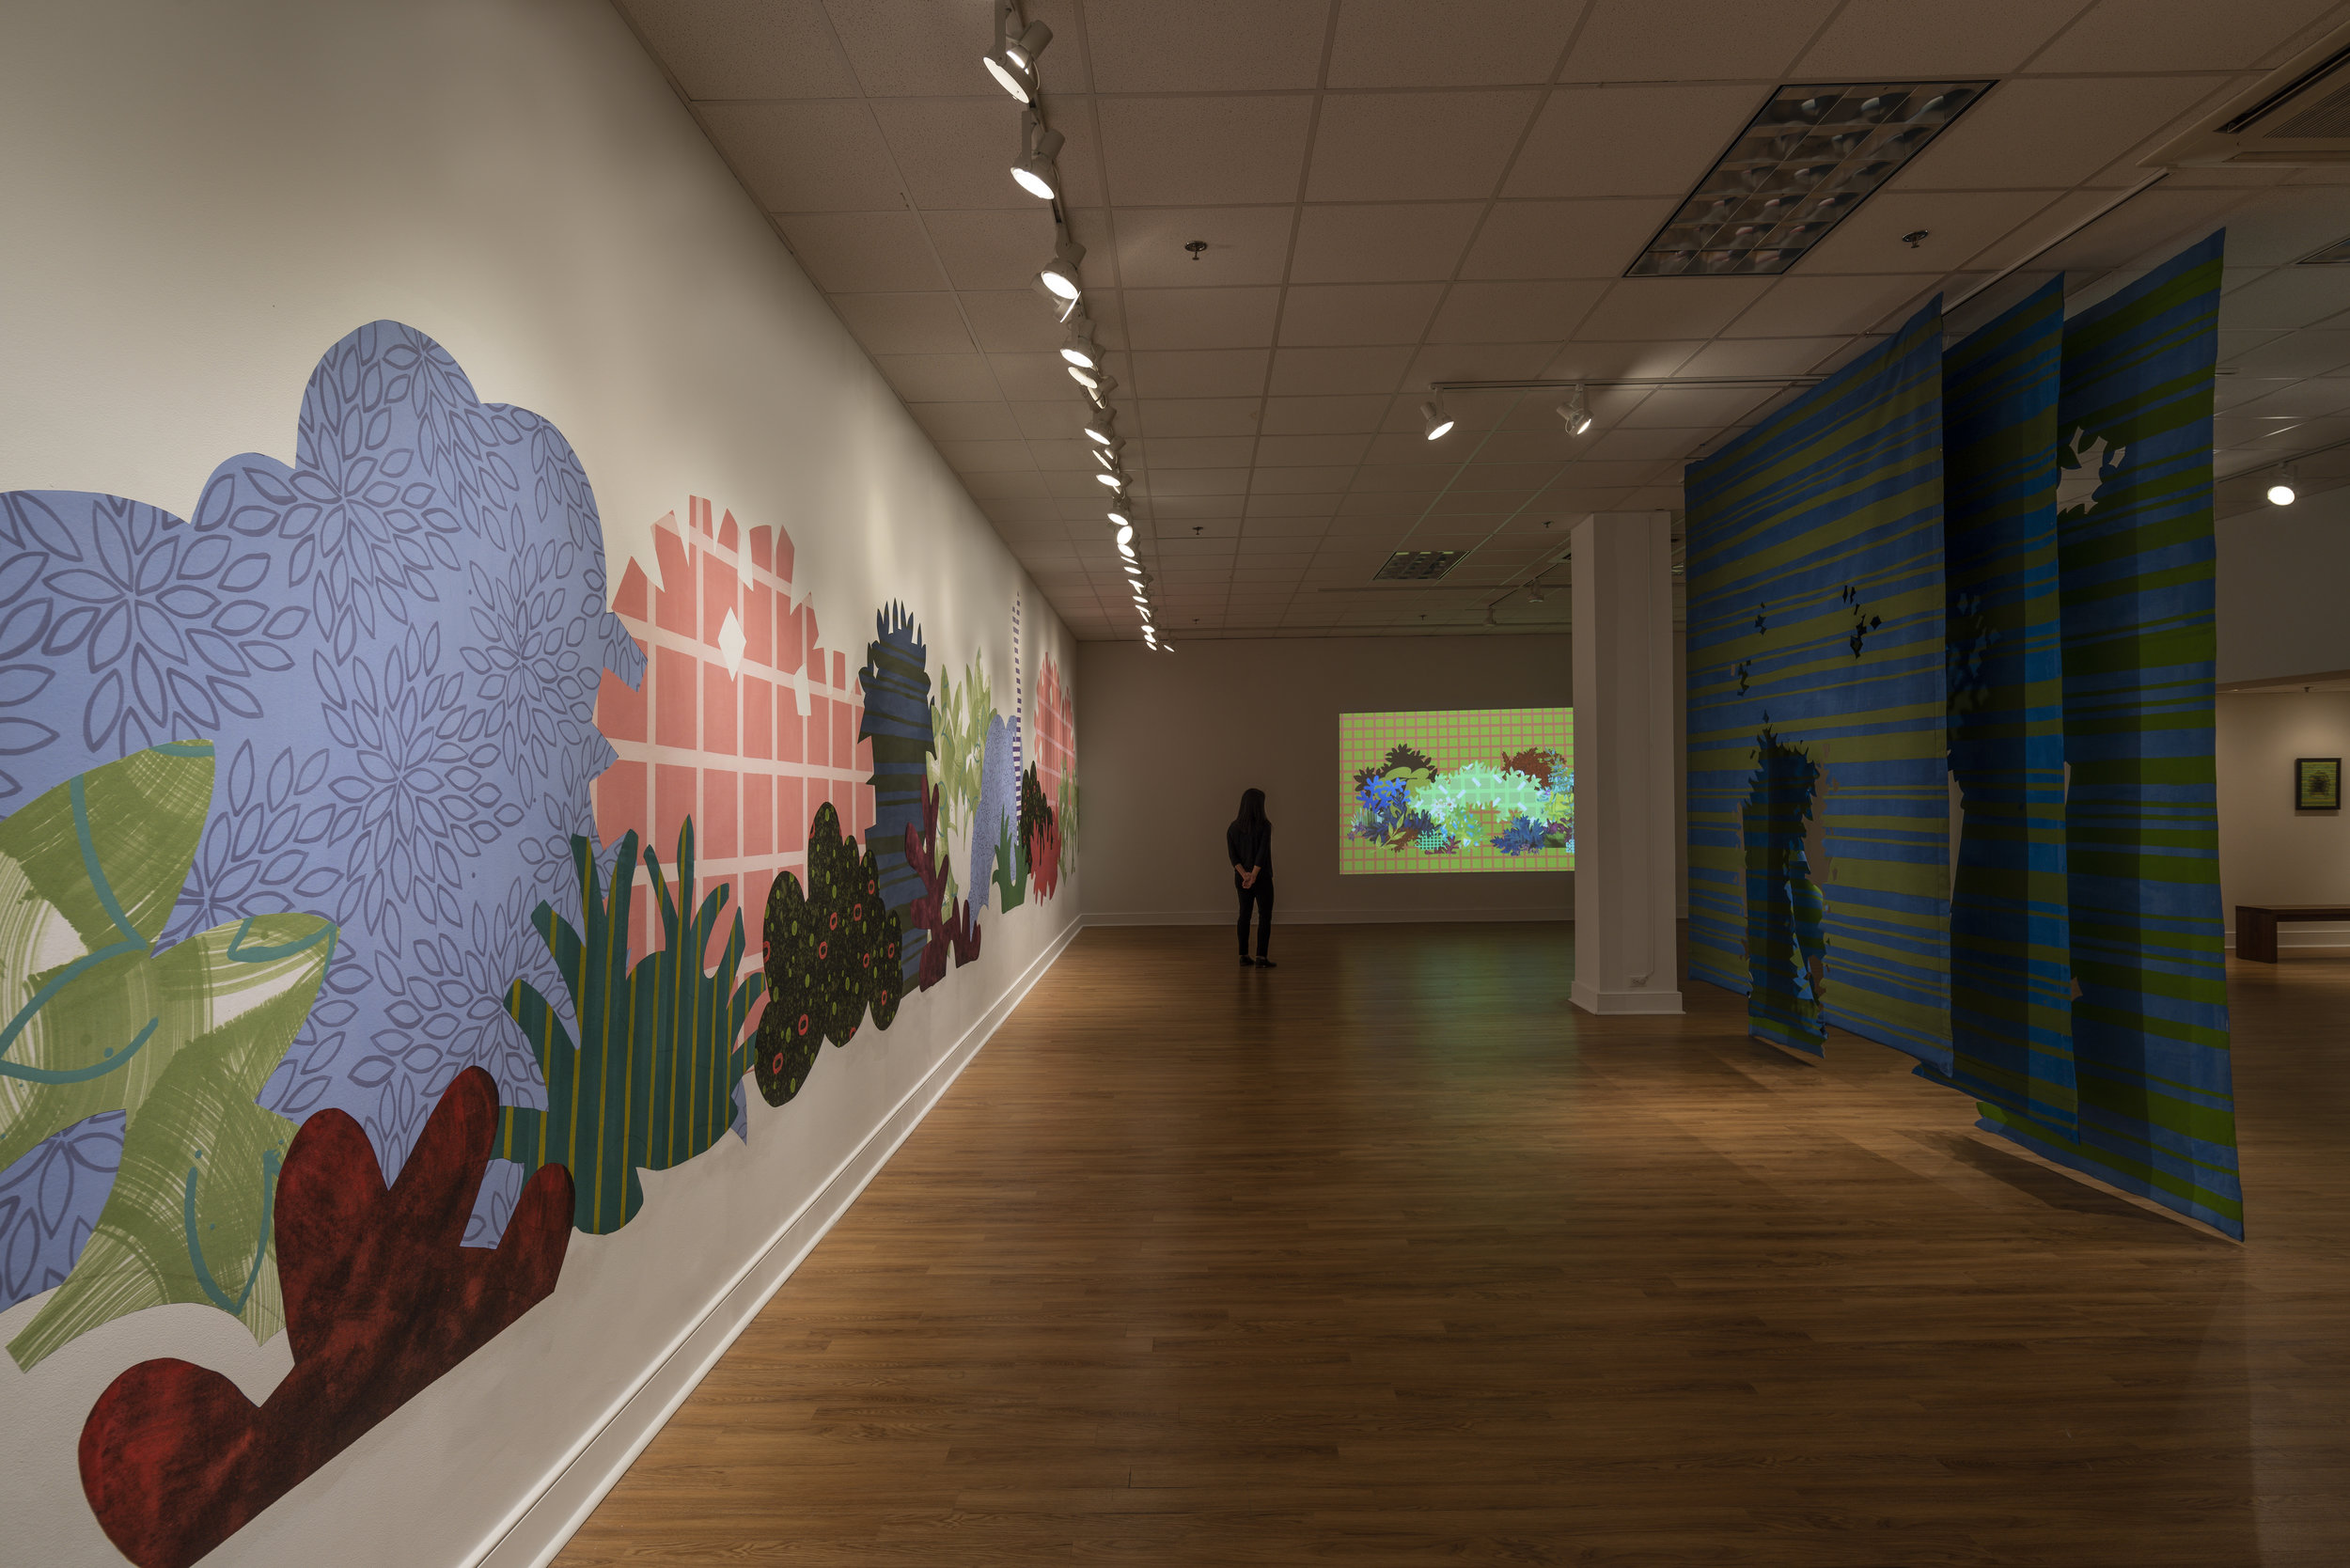  Works from right to left:     Proscenium Hedgerow   (2018) 11ft x 10ft x 2ft; series of three latex on cut muslin panels    Blinky Bricolage   (2019) 3 minute animation on loop, projection; collaboration with Kyle Statham     Piecemeal Promenade   (